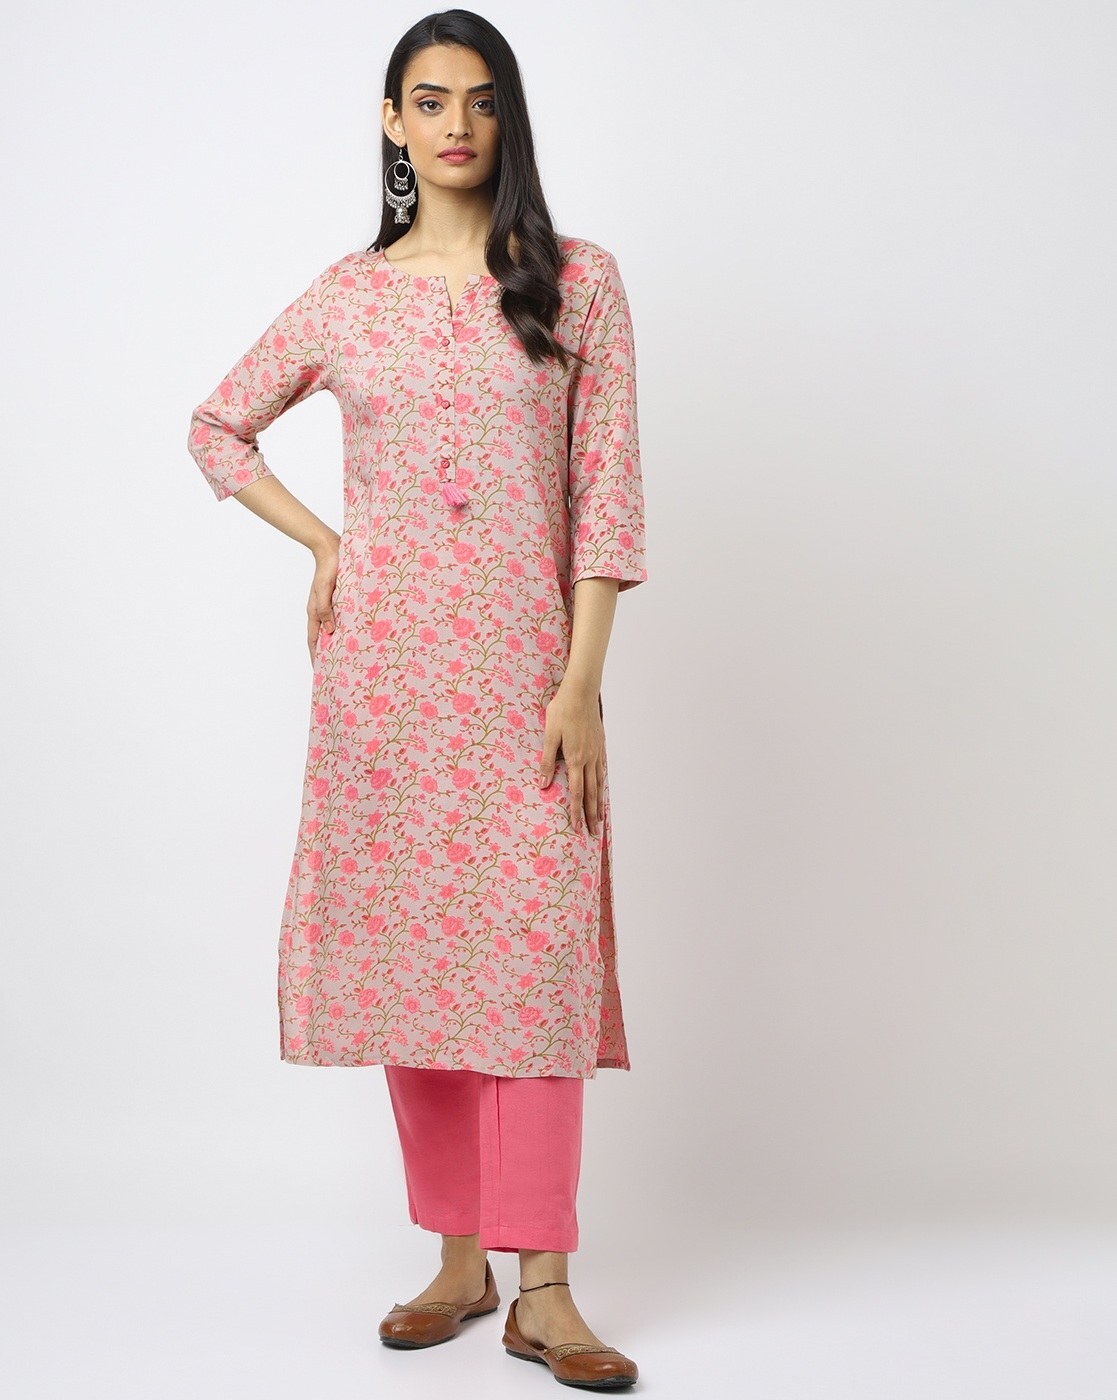 Buy Kurtis Under 200 Online In India At Best Price Offers | Tata CLiQ